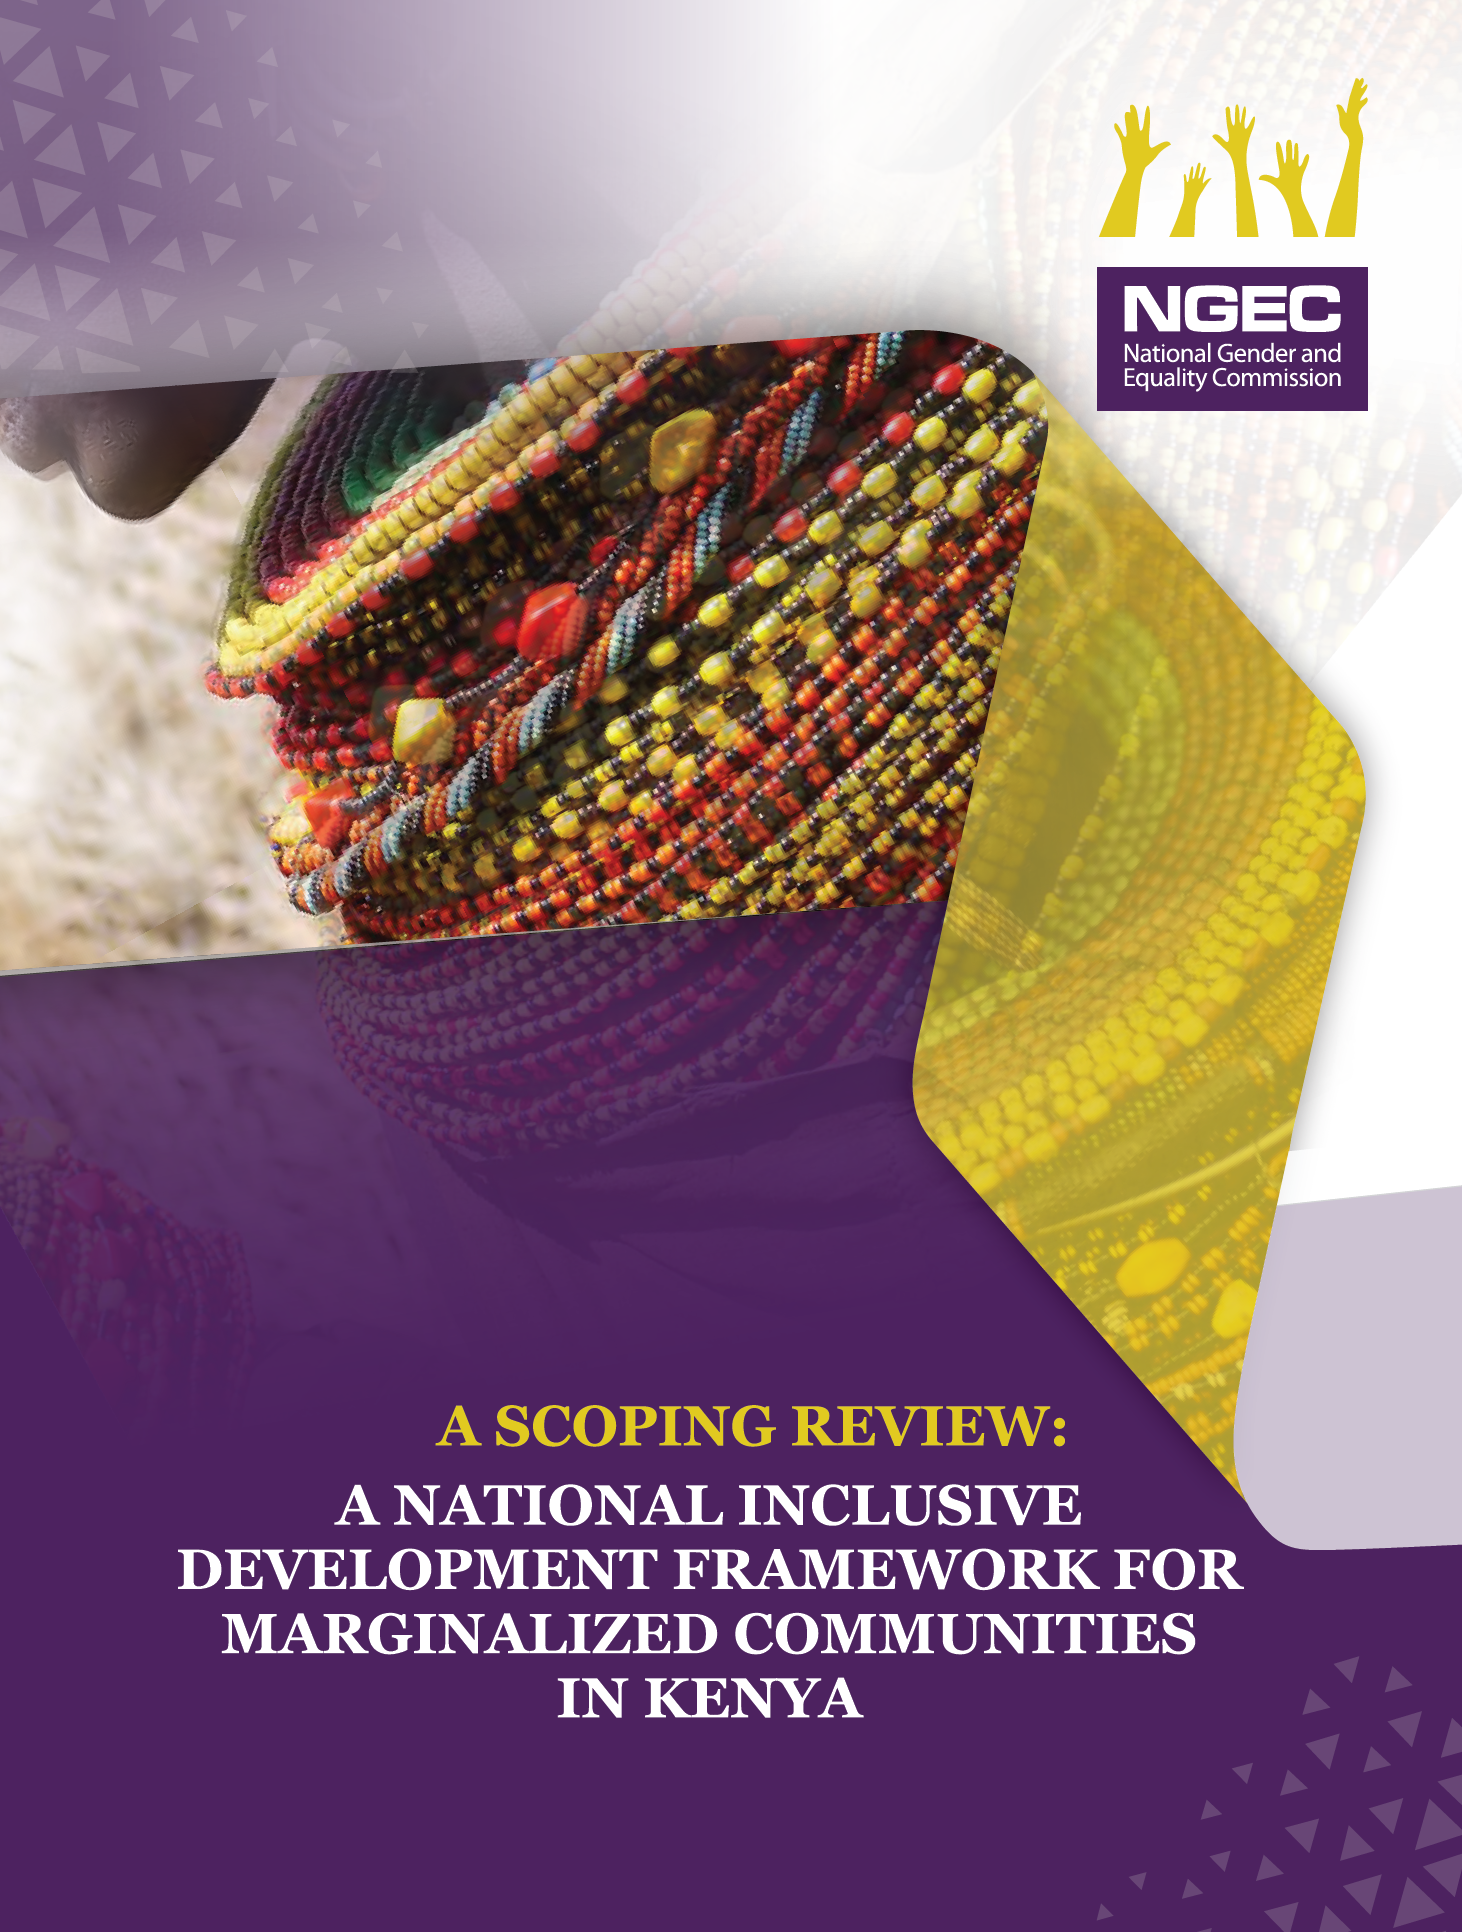 A Scoping Review: A National Inclusive Development Framework for Marginalized Communities in Kenya